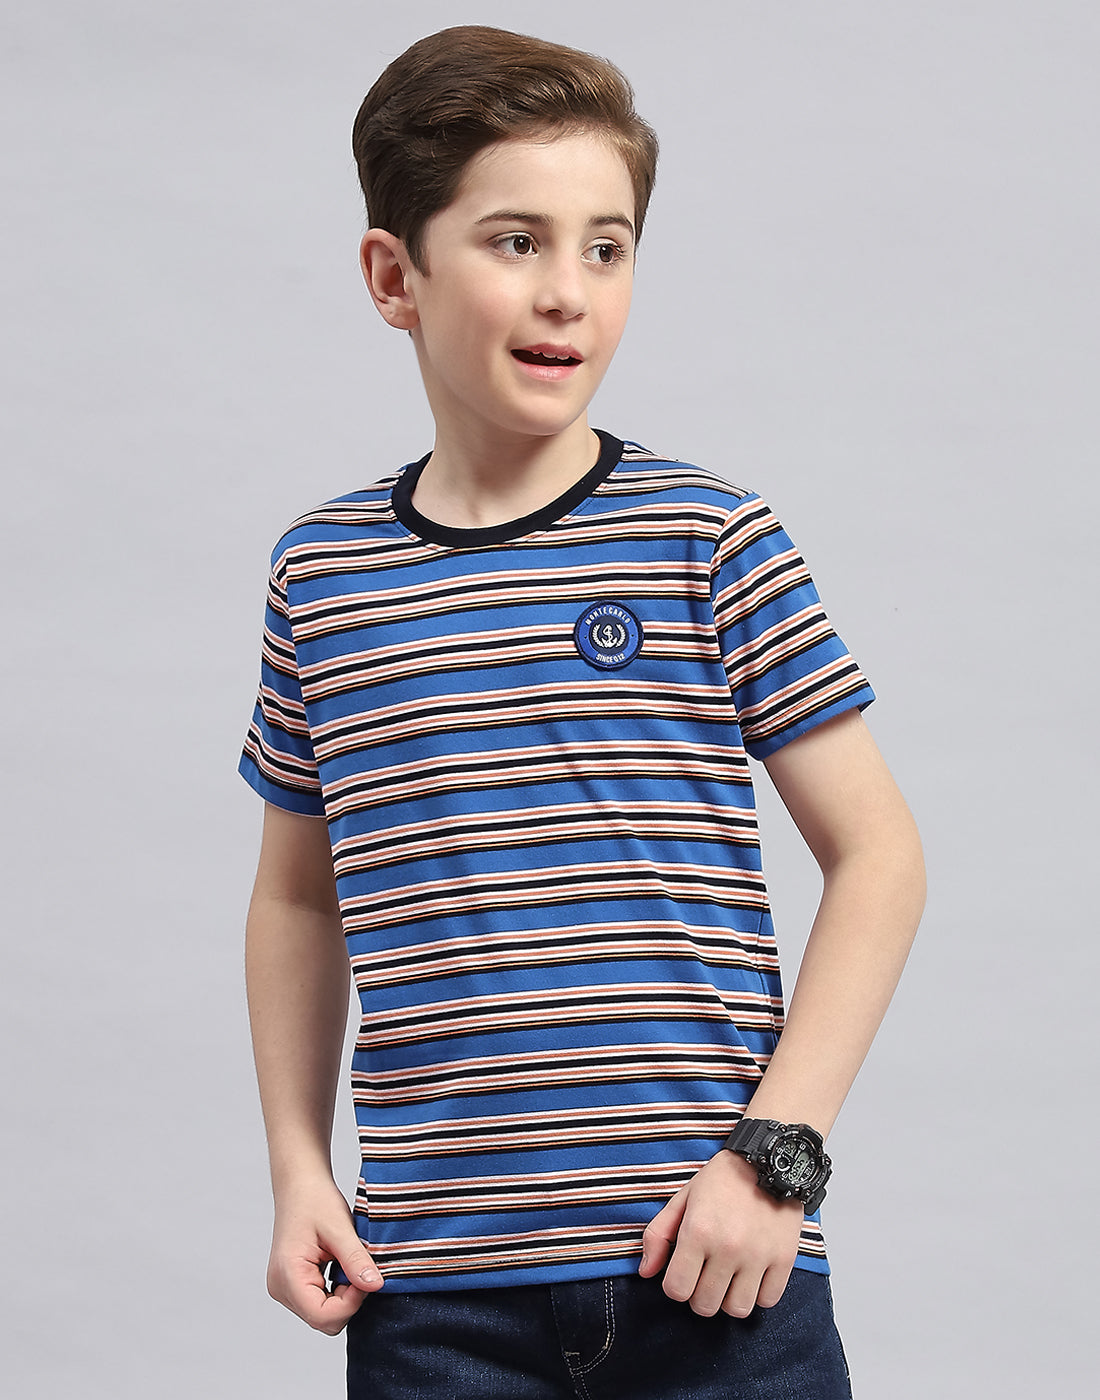 Boys Printed Round Neck Half Sleeve T-Shirt (Pack of 3)